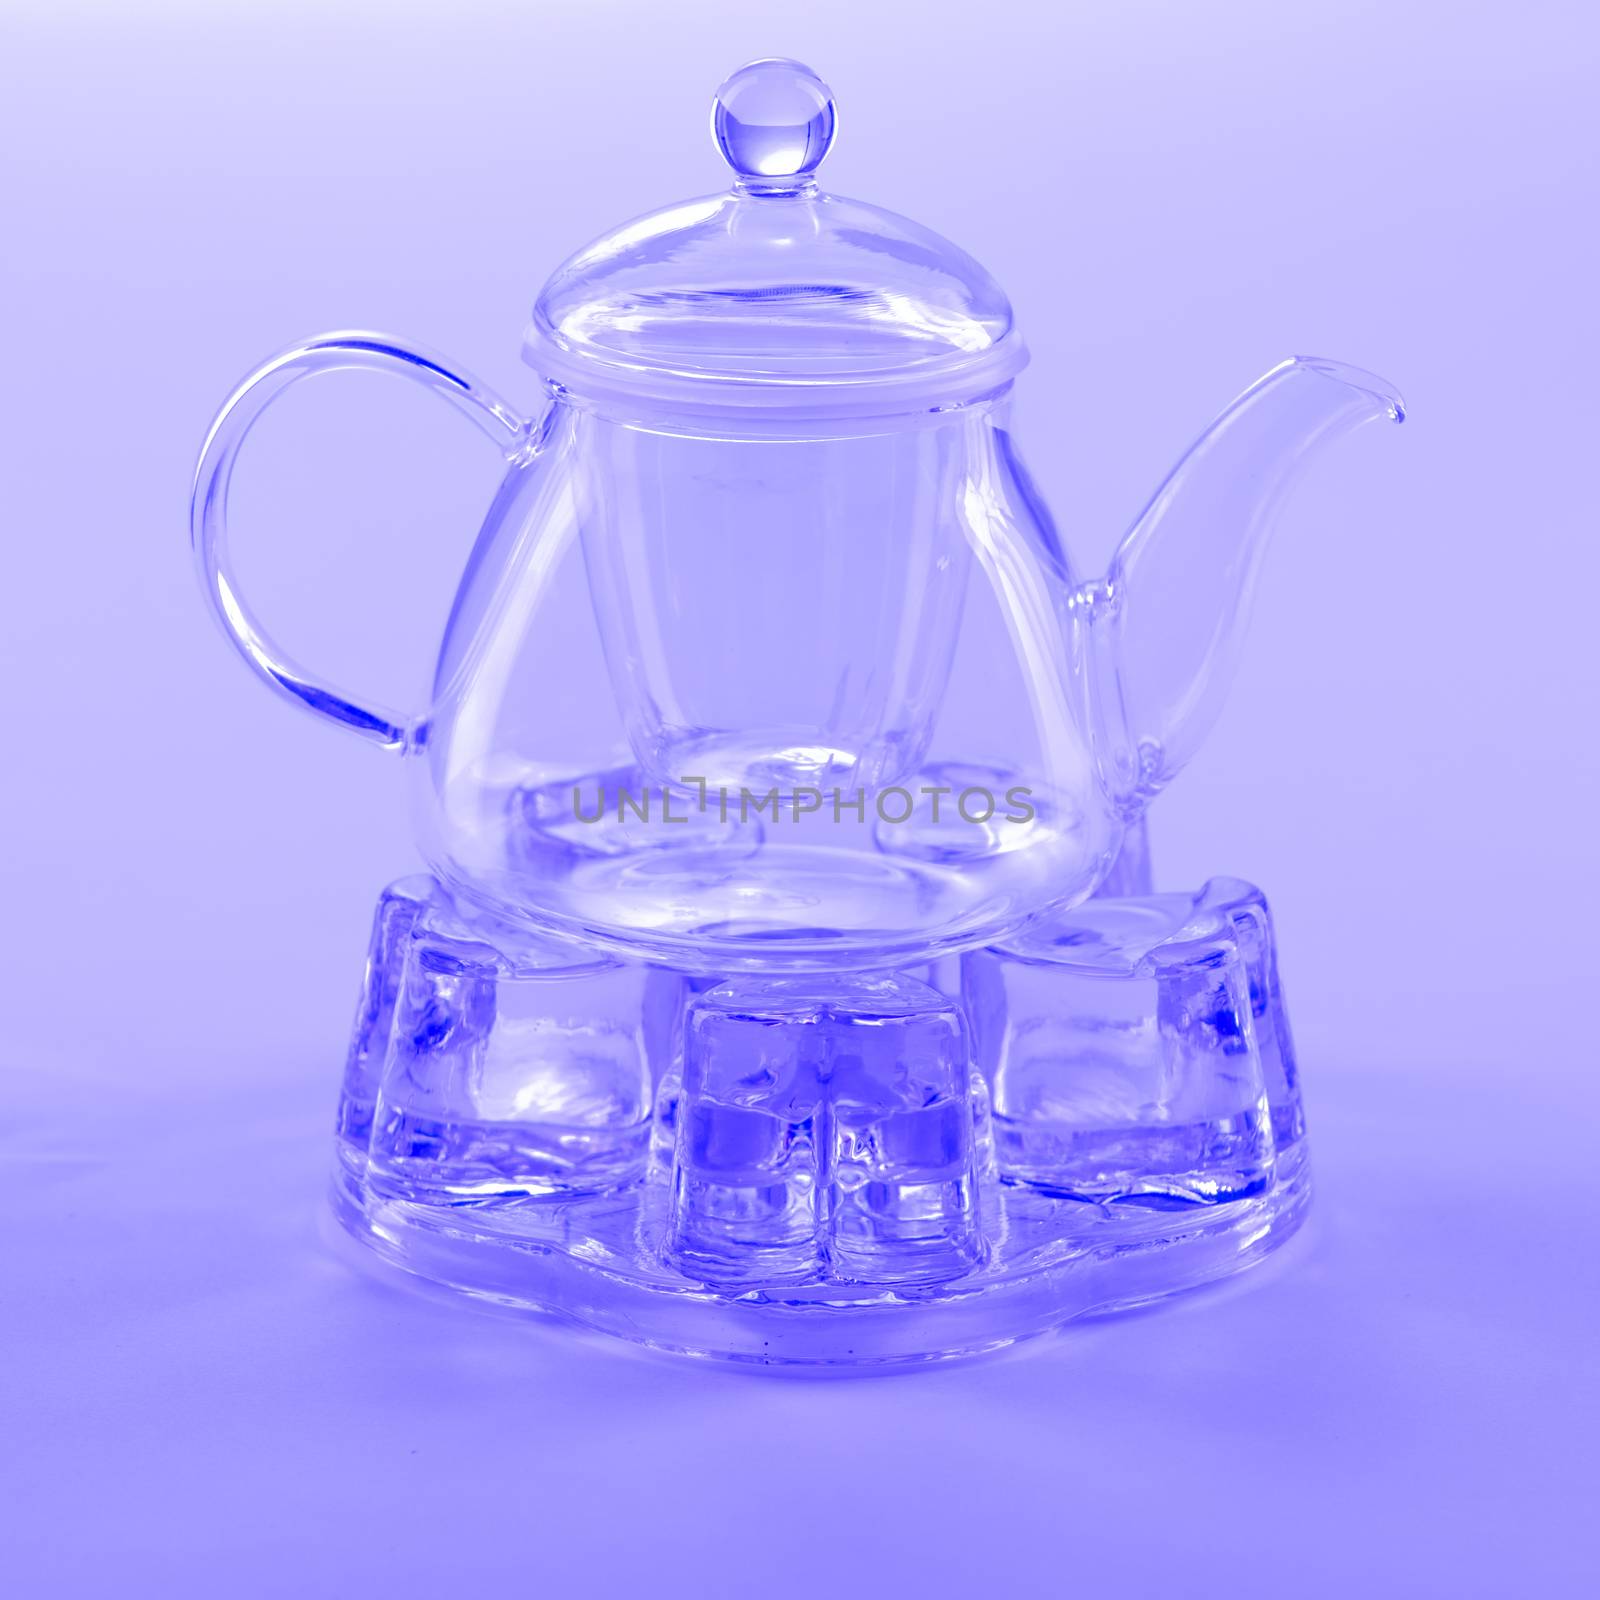 Isolated Tea Pot from glass on the table